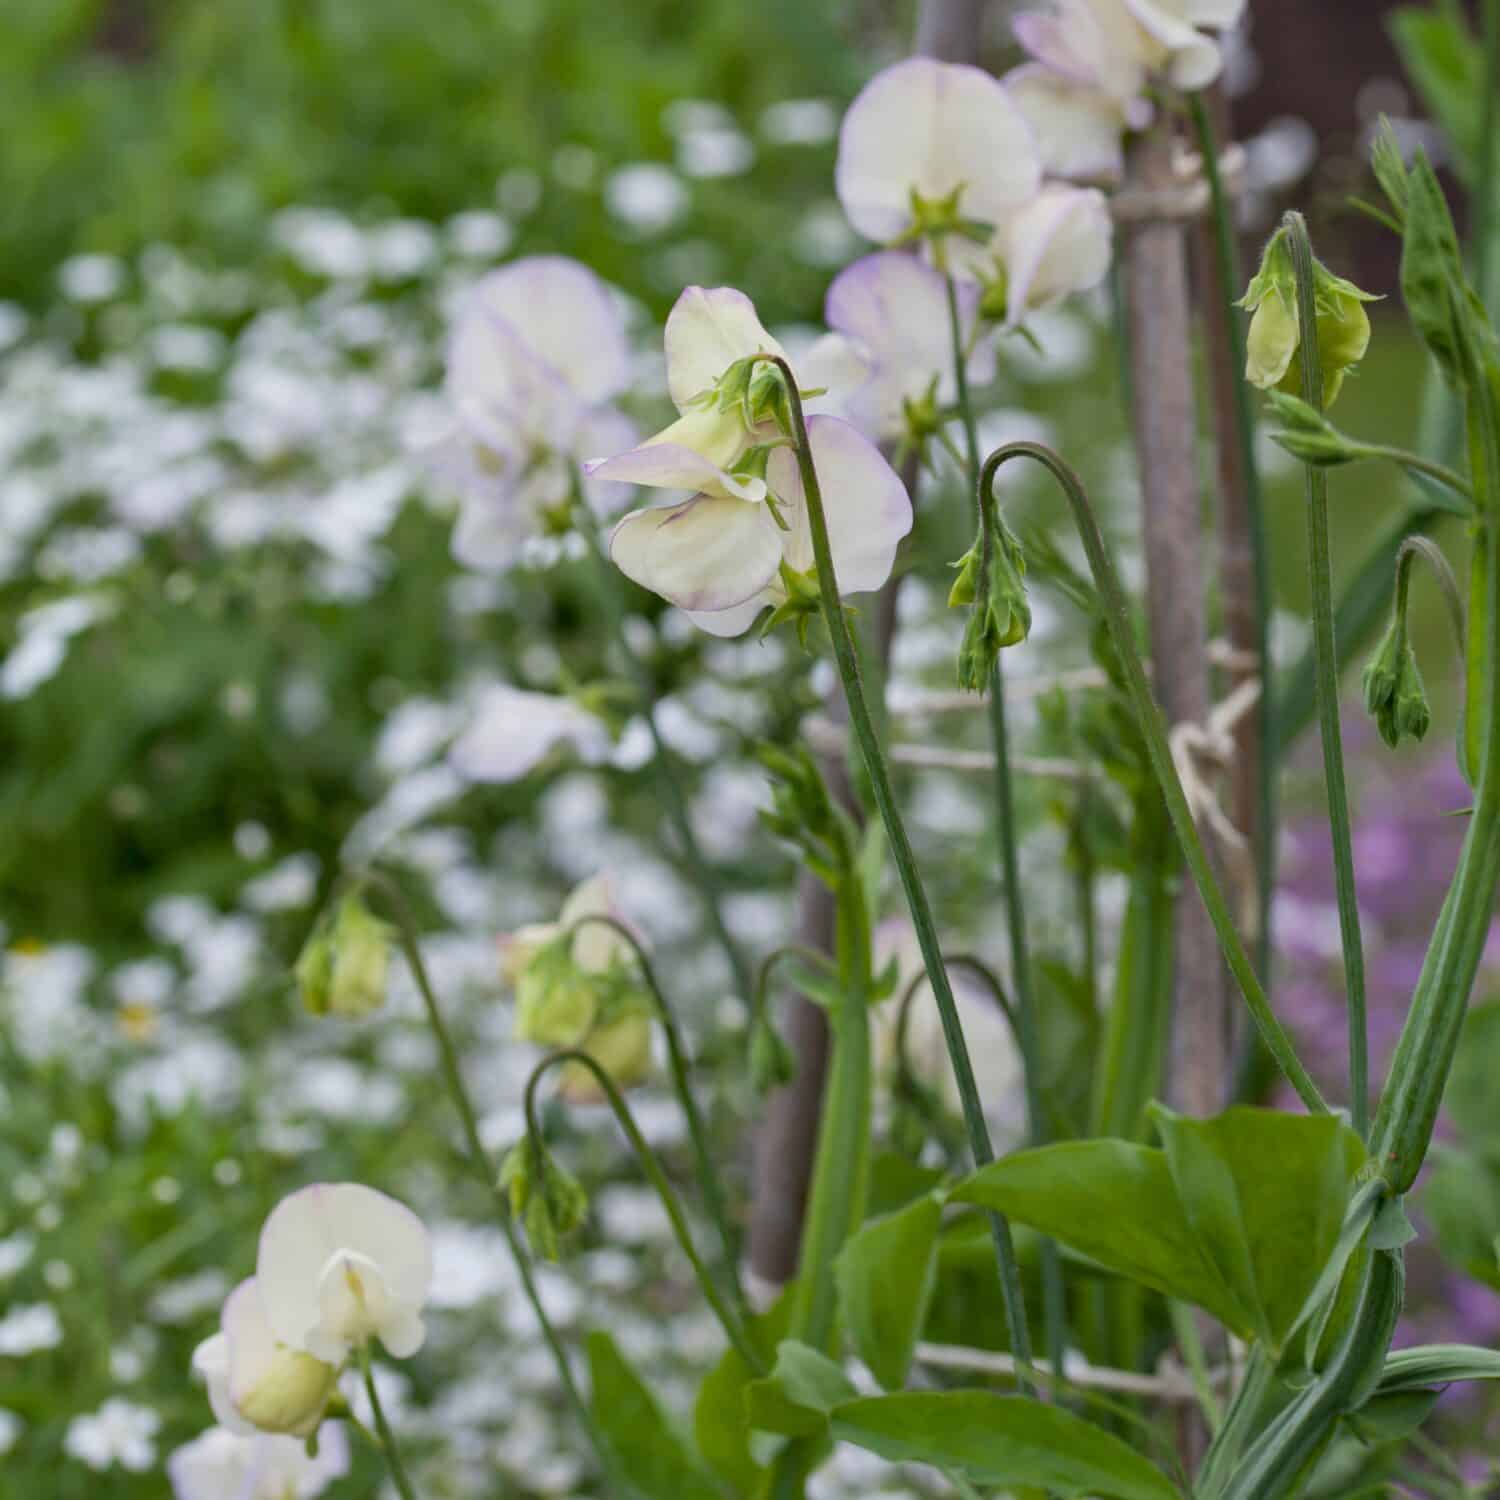 Sweet Peas  - Lathyrus odoratus -  decorative plant for the traditional cottage garden style.